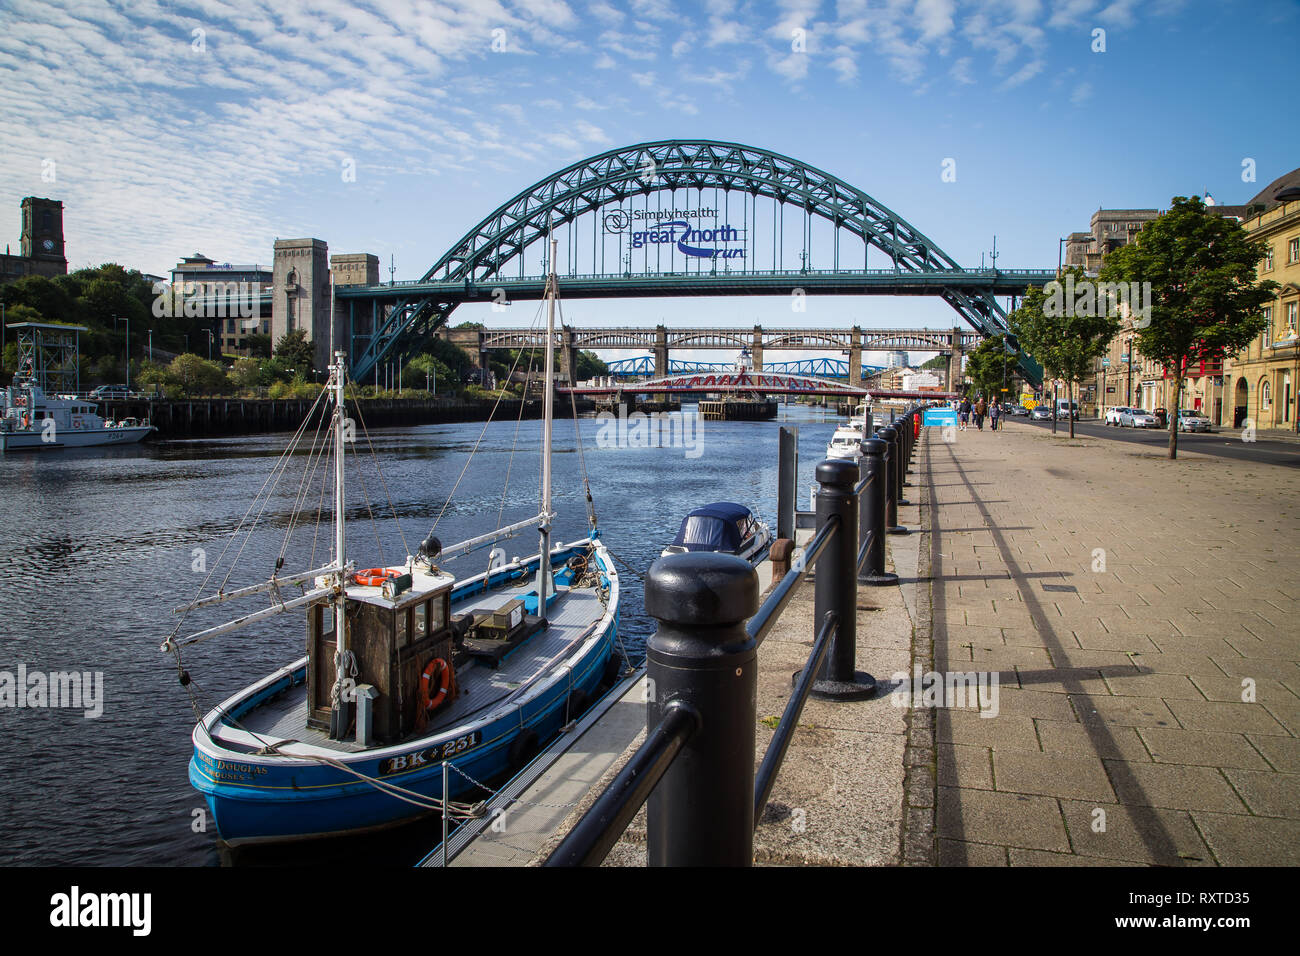 Newcastle,UK. Tyne bridge with great north run sign and a boat moored up in the foreground Stock Photo